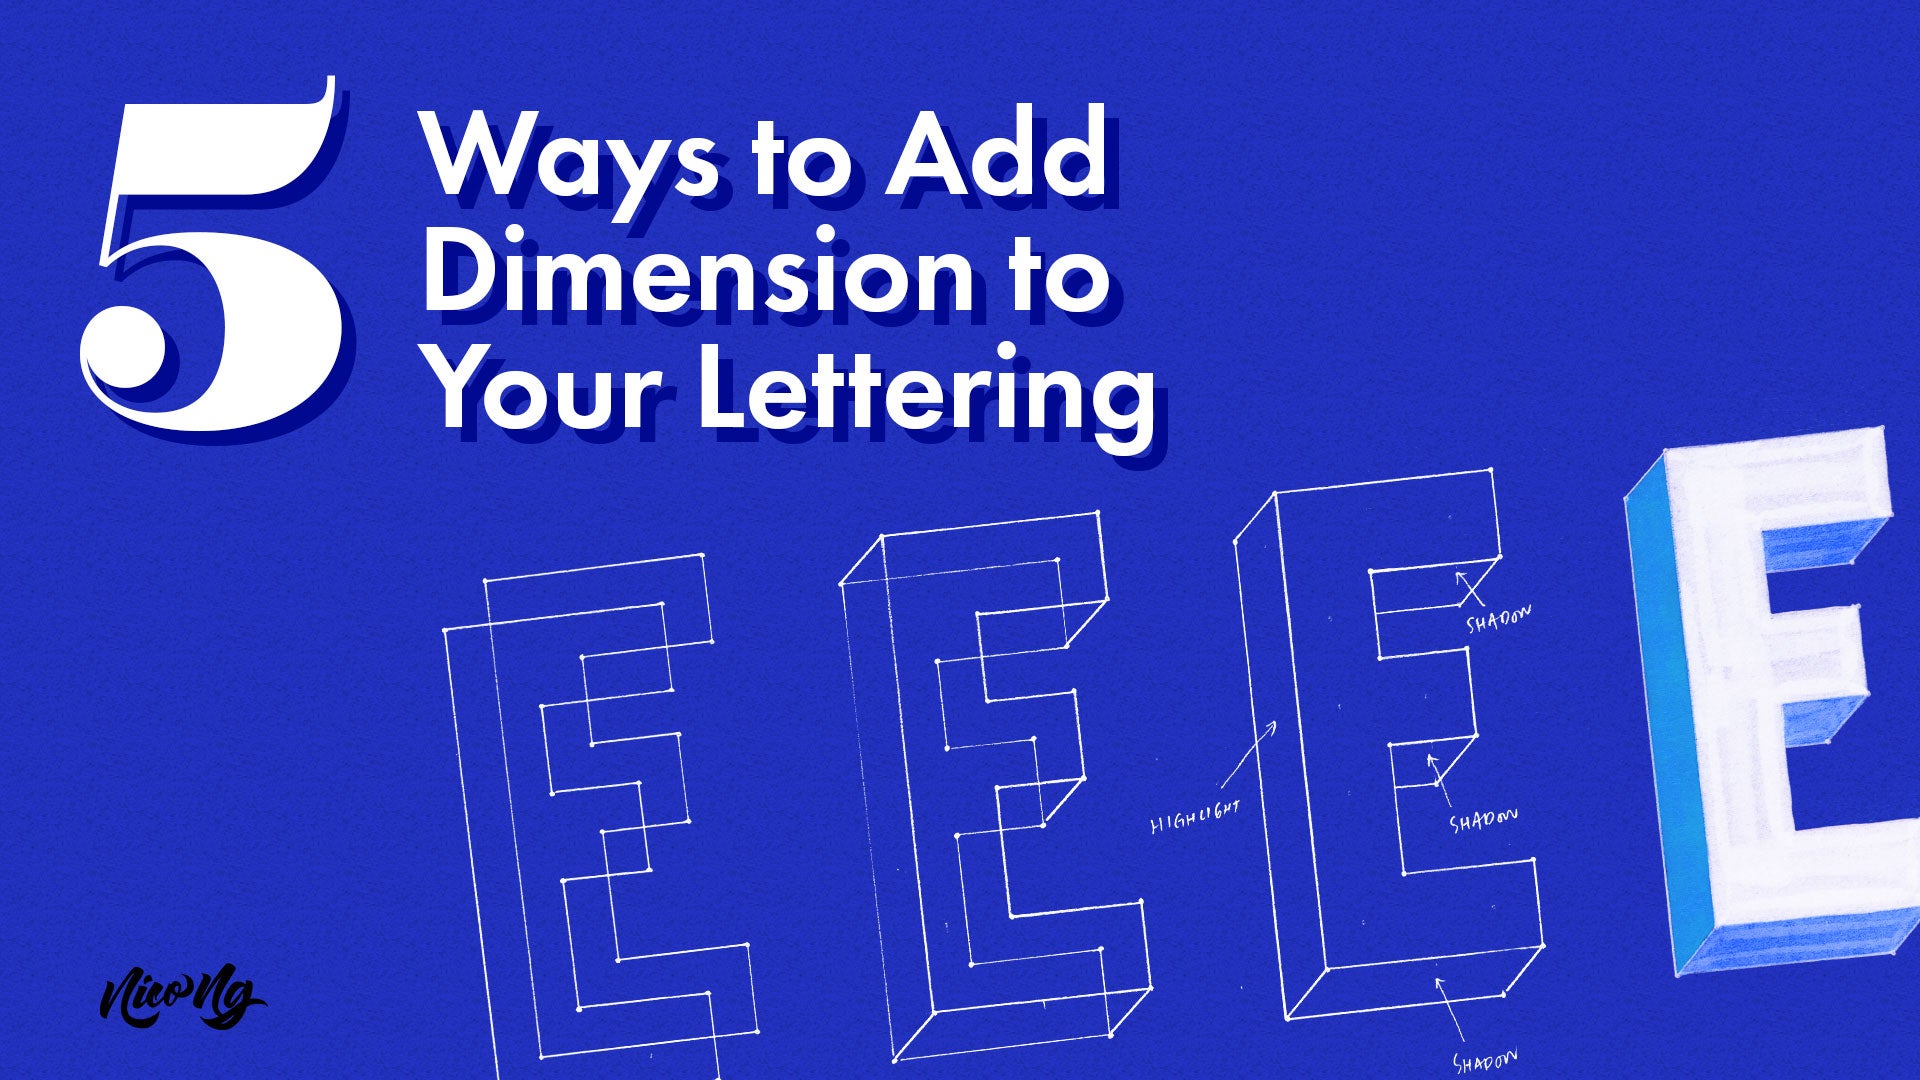 5 Ways to Add Dimension to Your Lettering